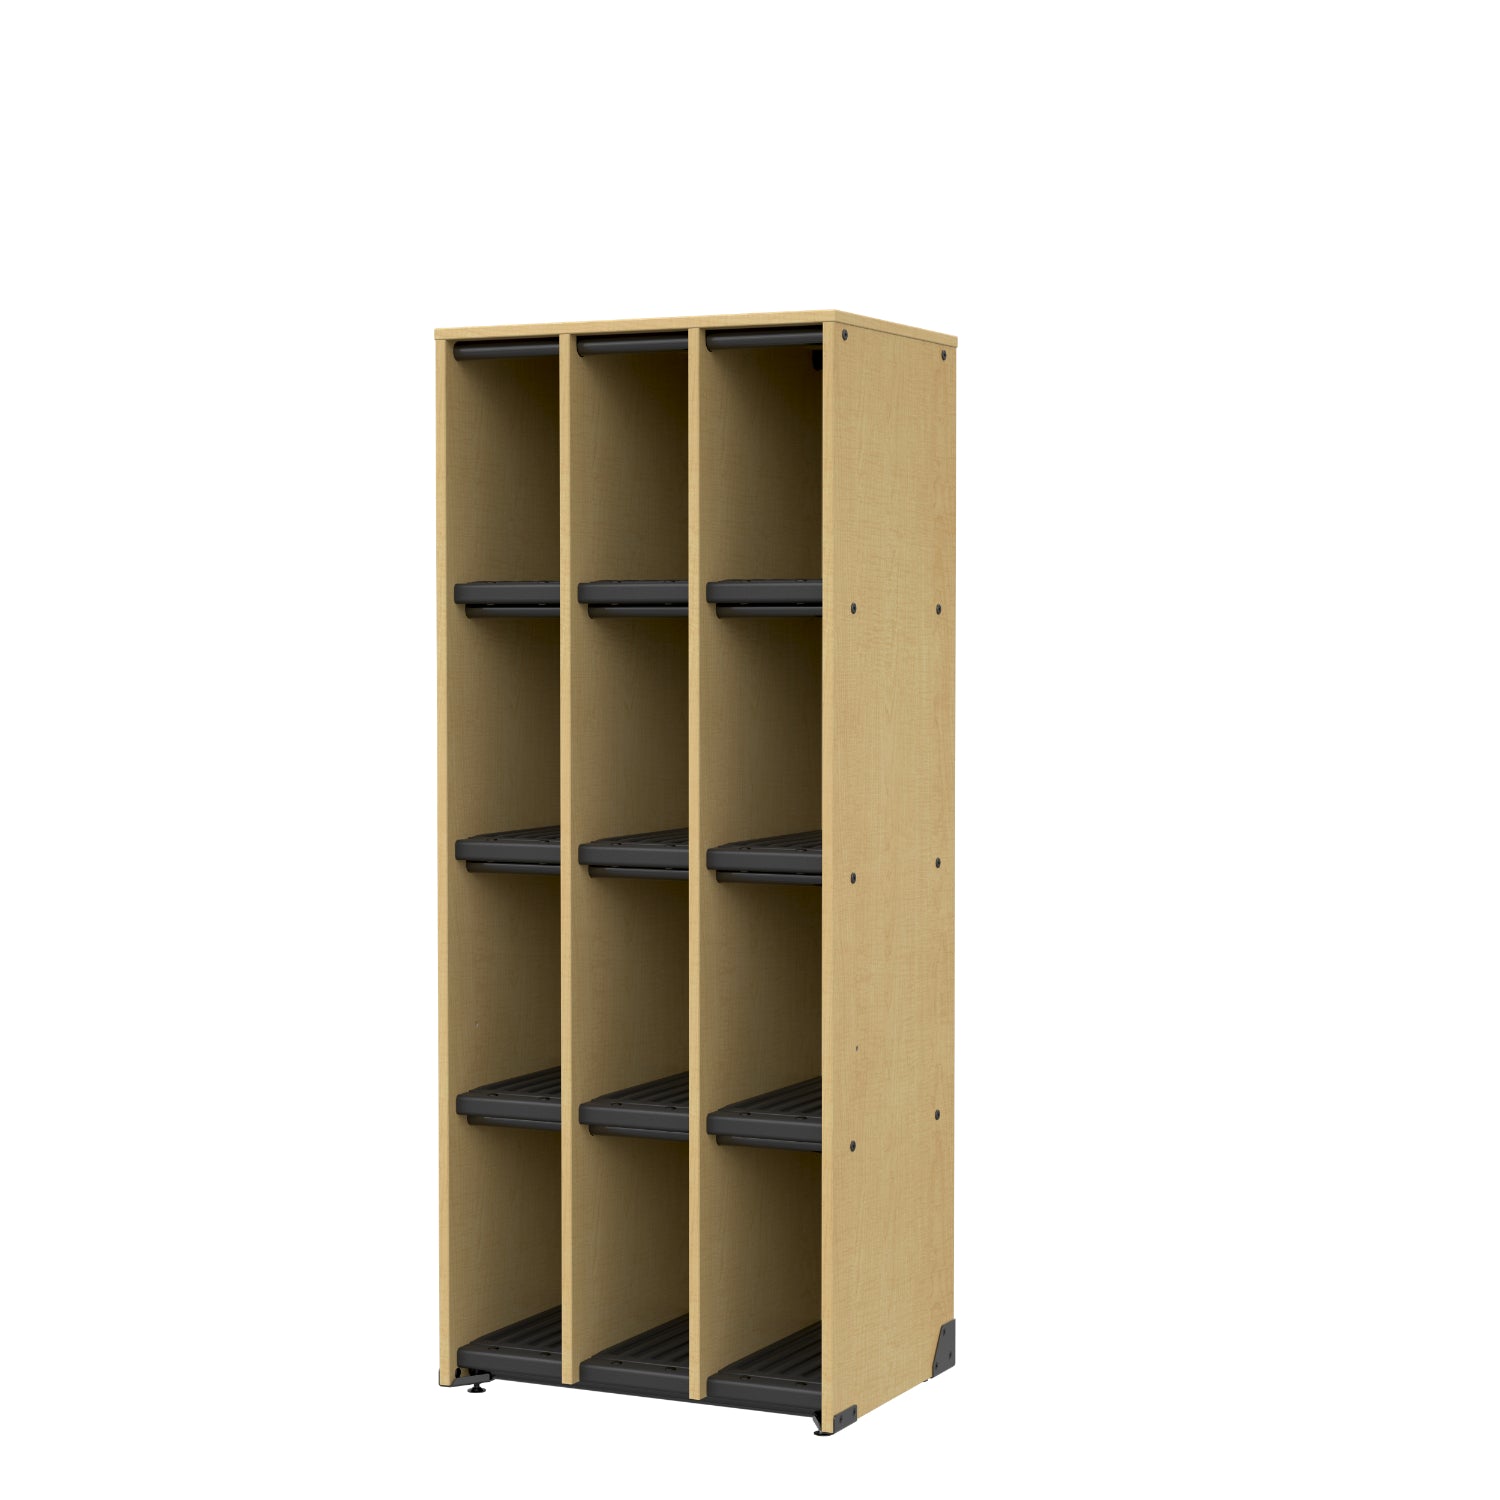 Bandstor™ 12 Compartment Woodwind Storage, 27.75"W x 68"H x 19.25"D